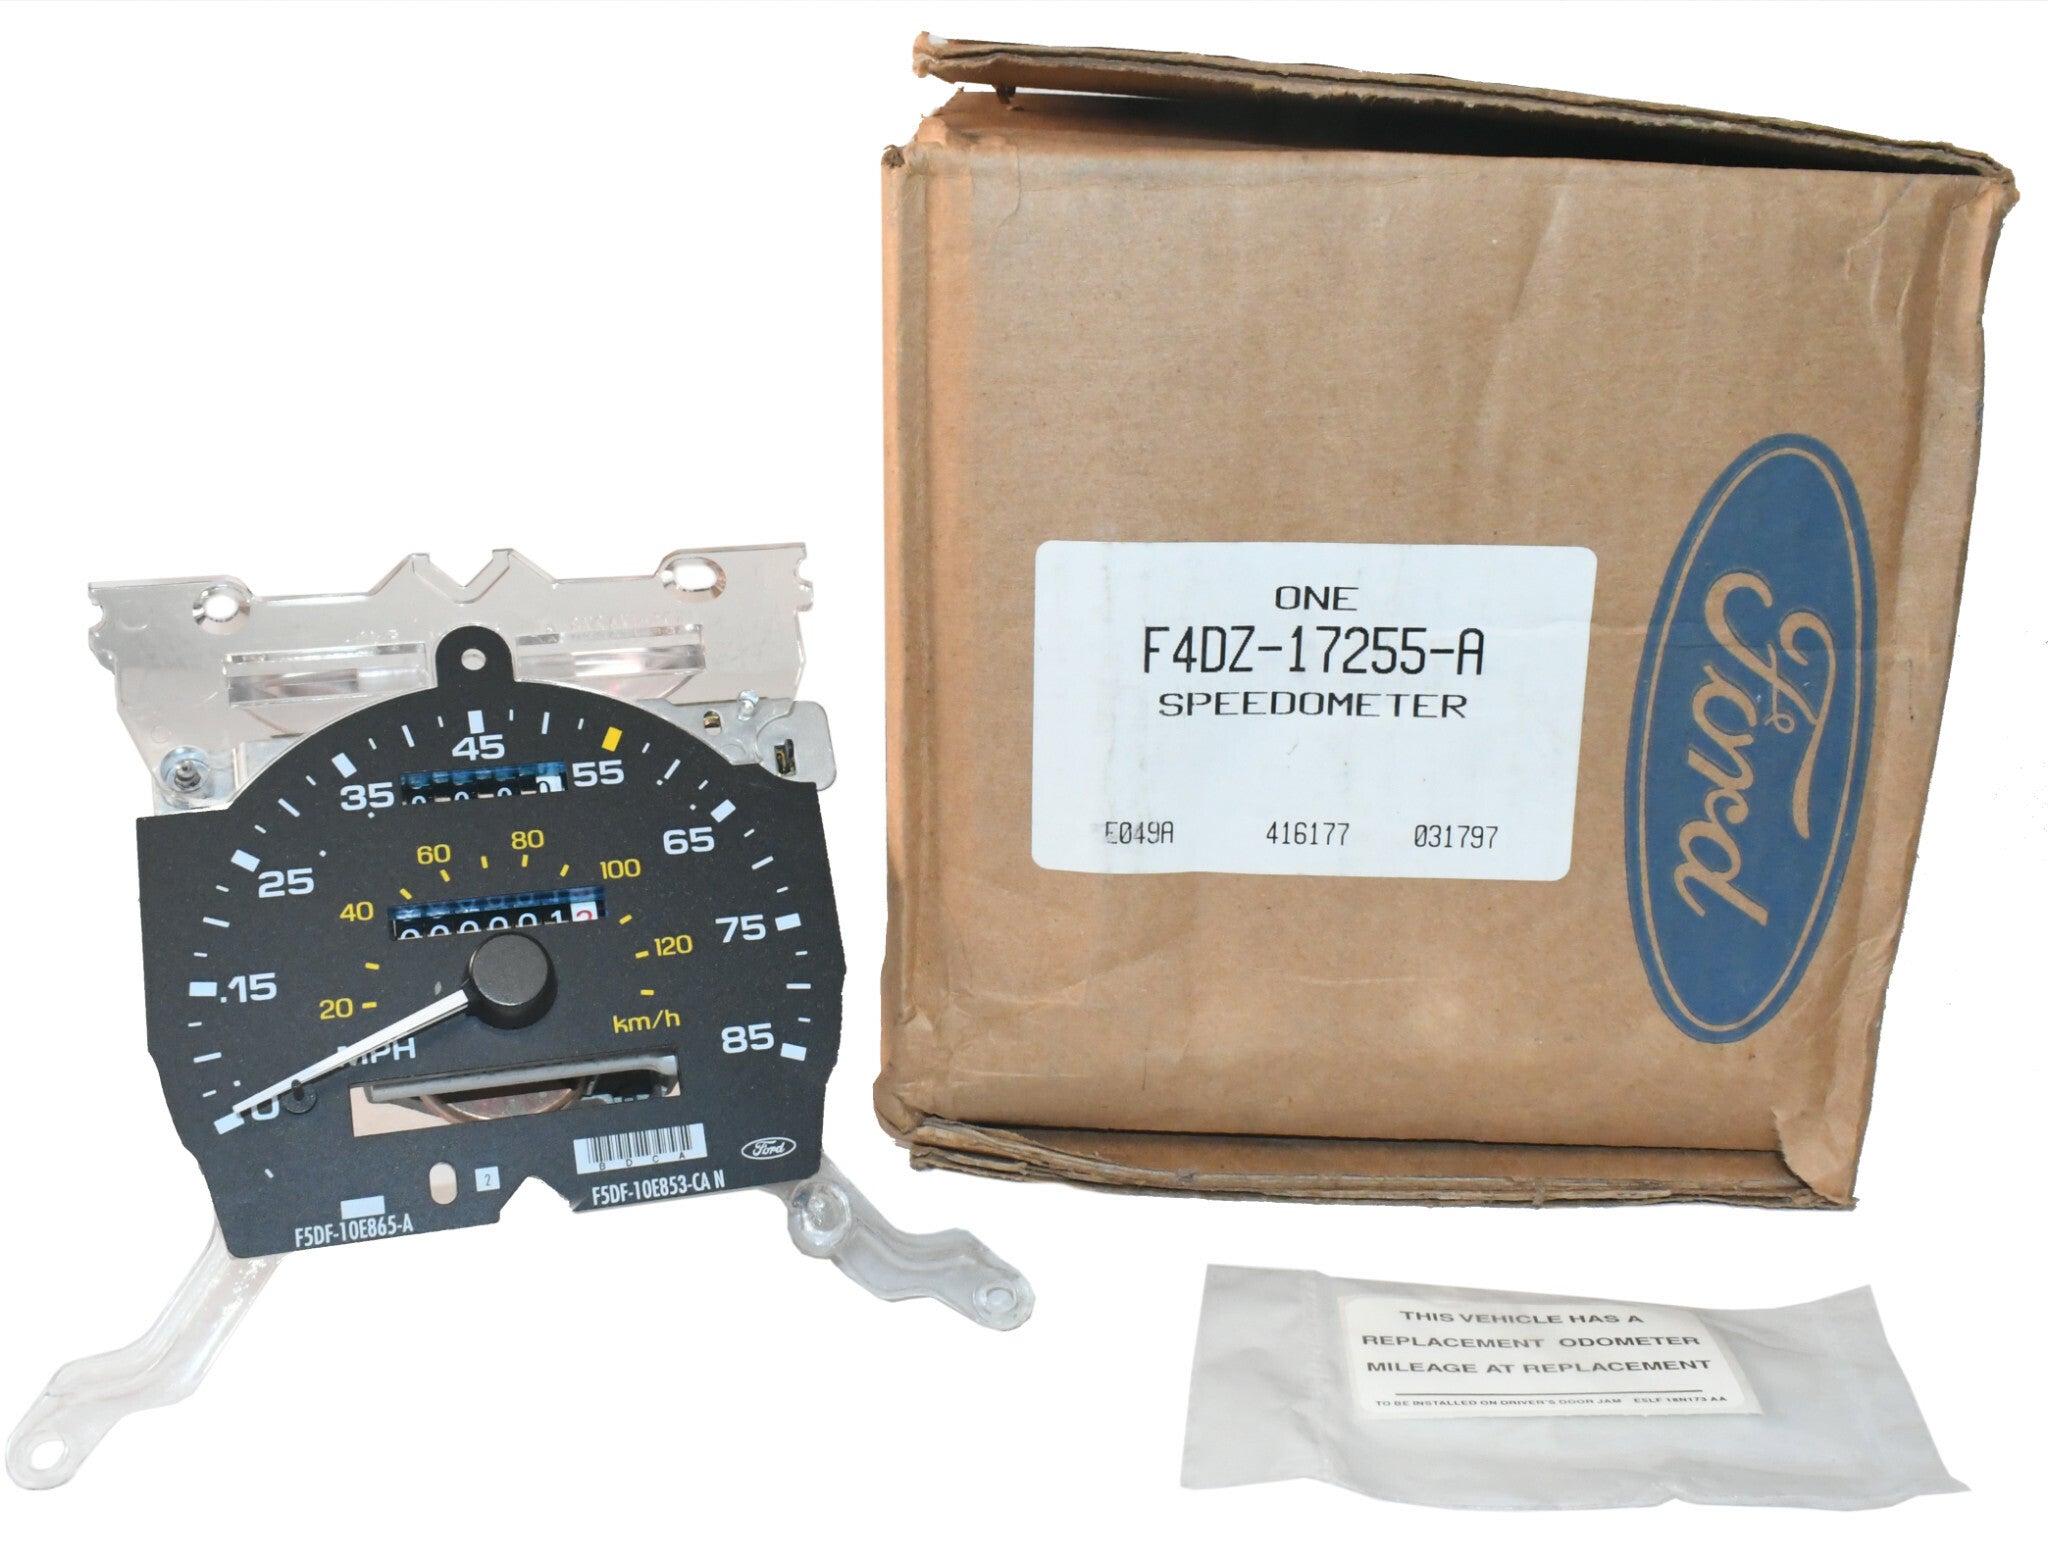 New Ford speedometer head for 1992-1995 Ford Taurus / Mercury Sable F4DZ-17255-A